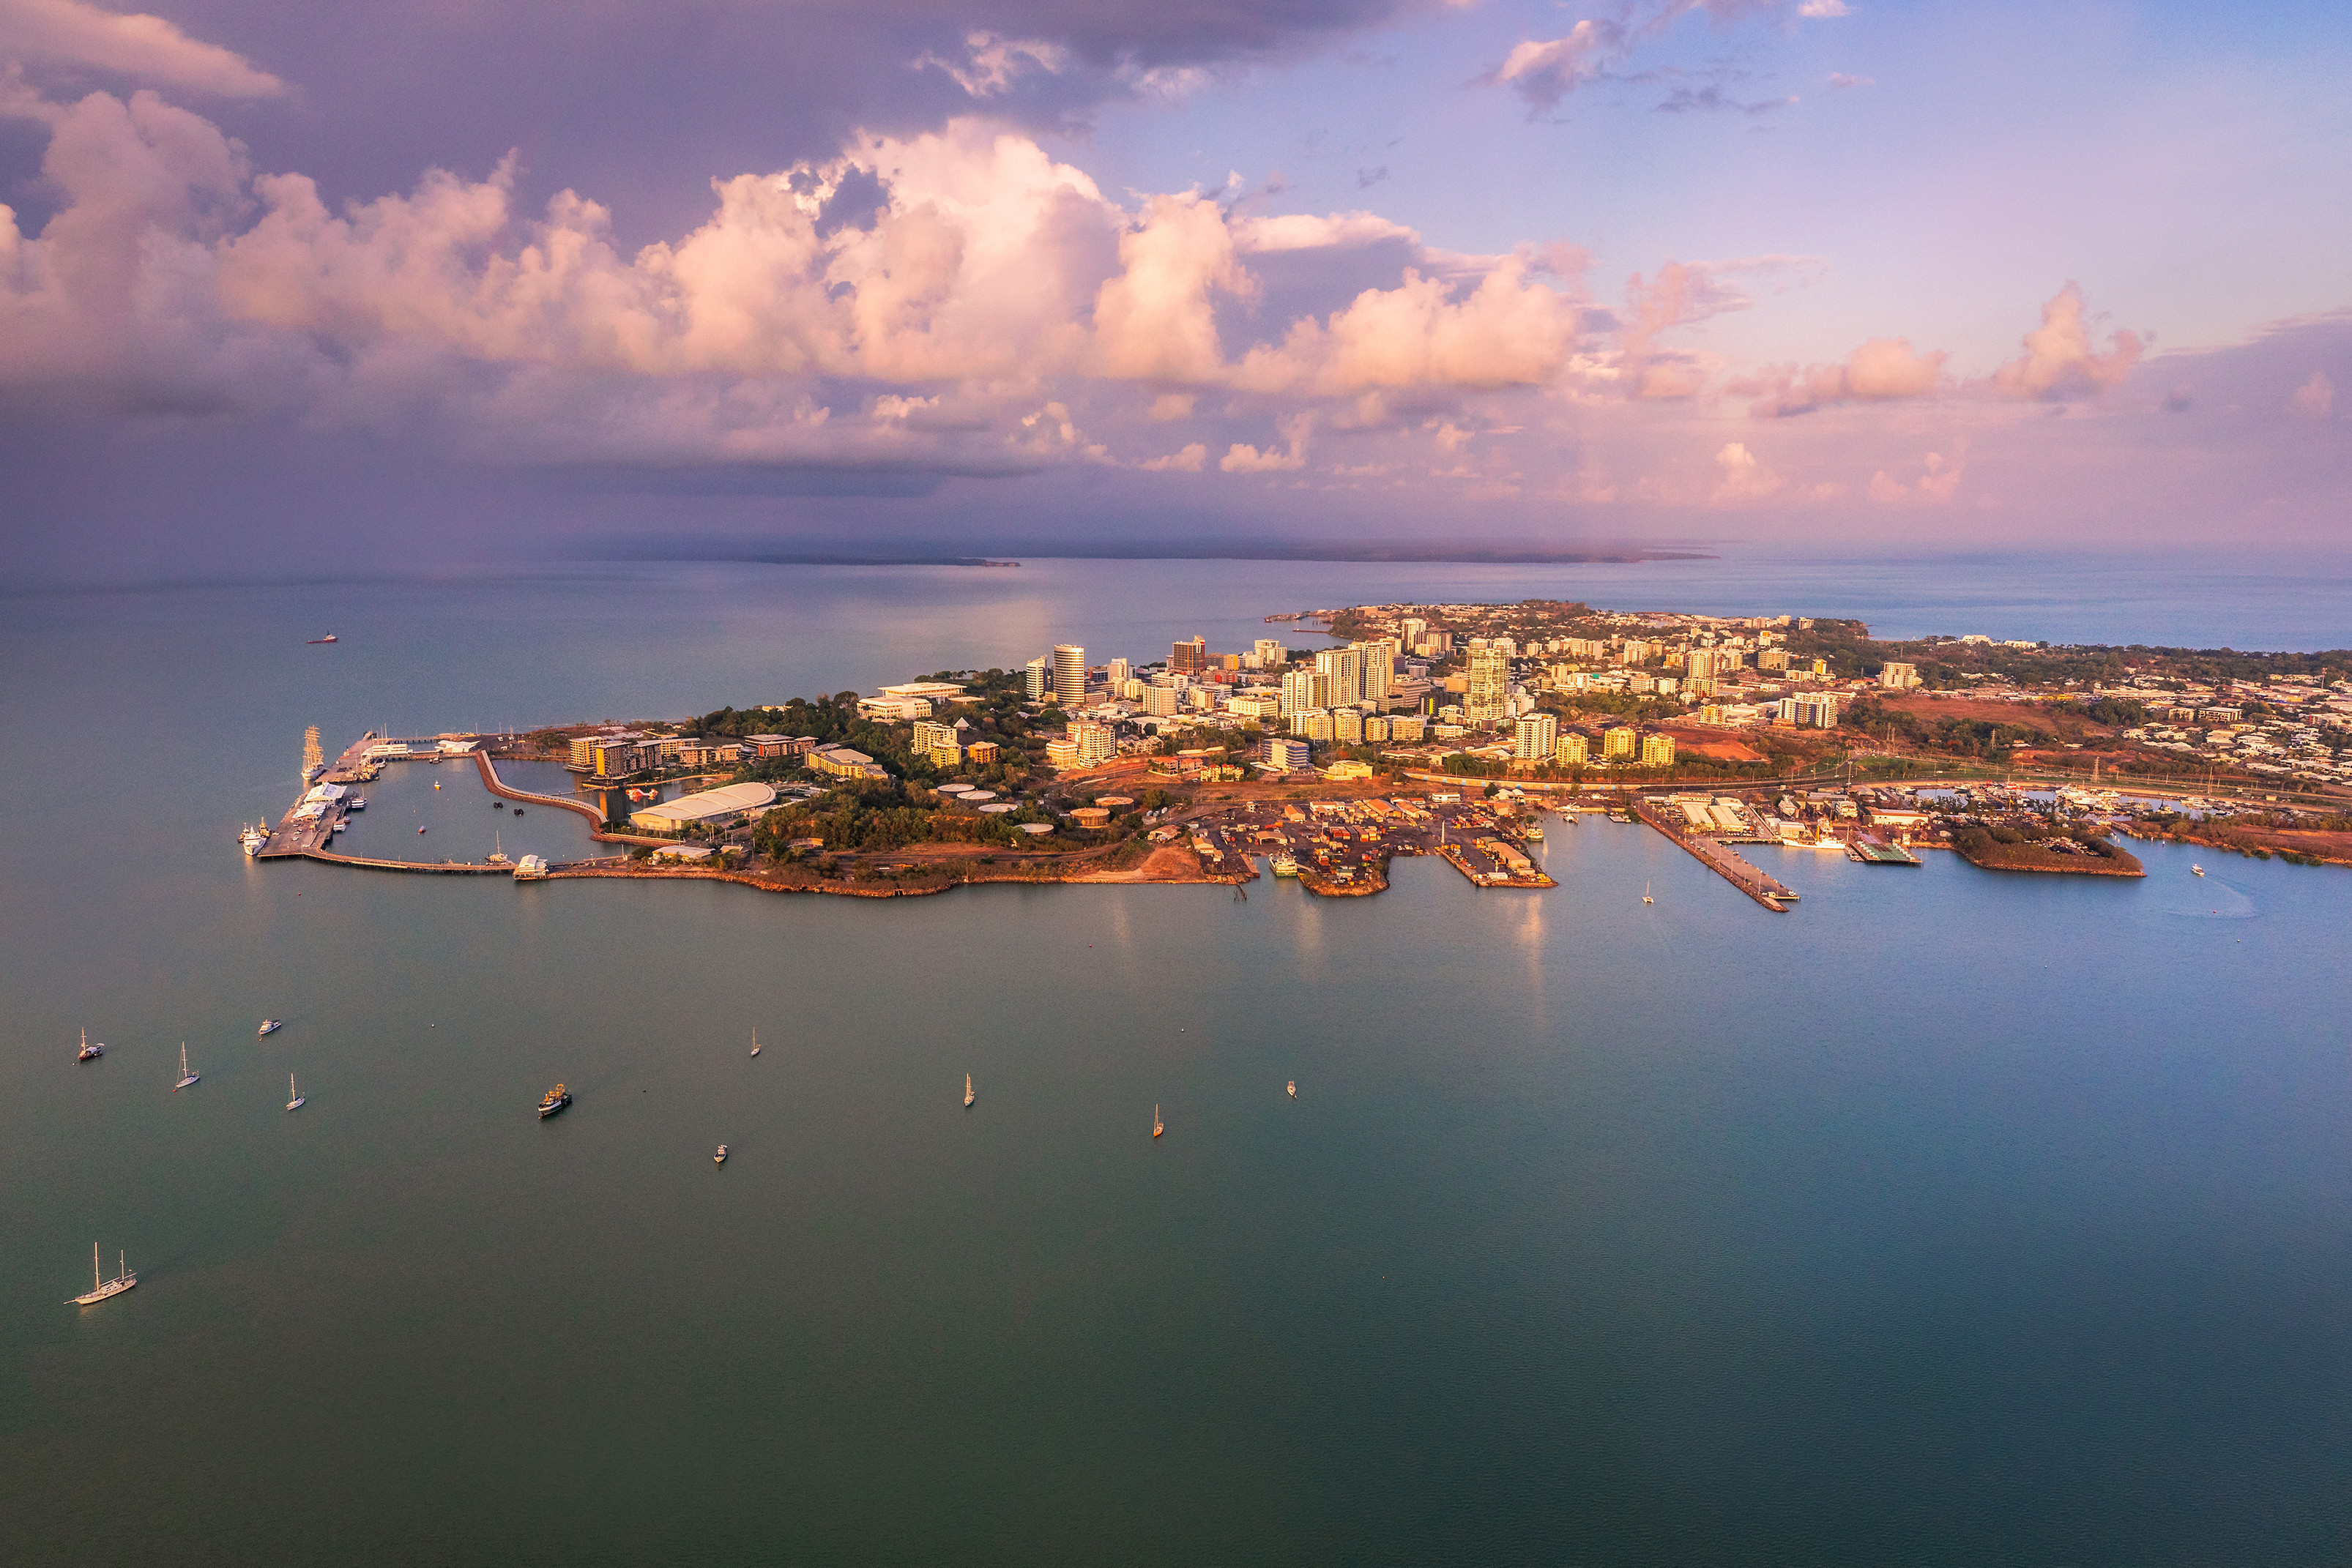 Support local and get out and about in Darwin – Sue’s Top 5 City Breaks